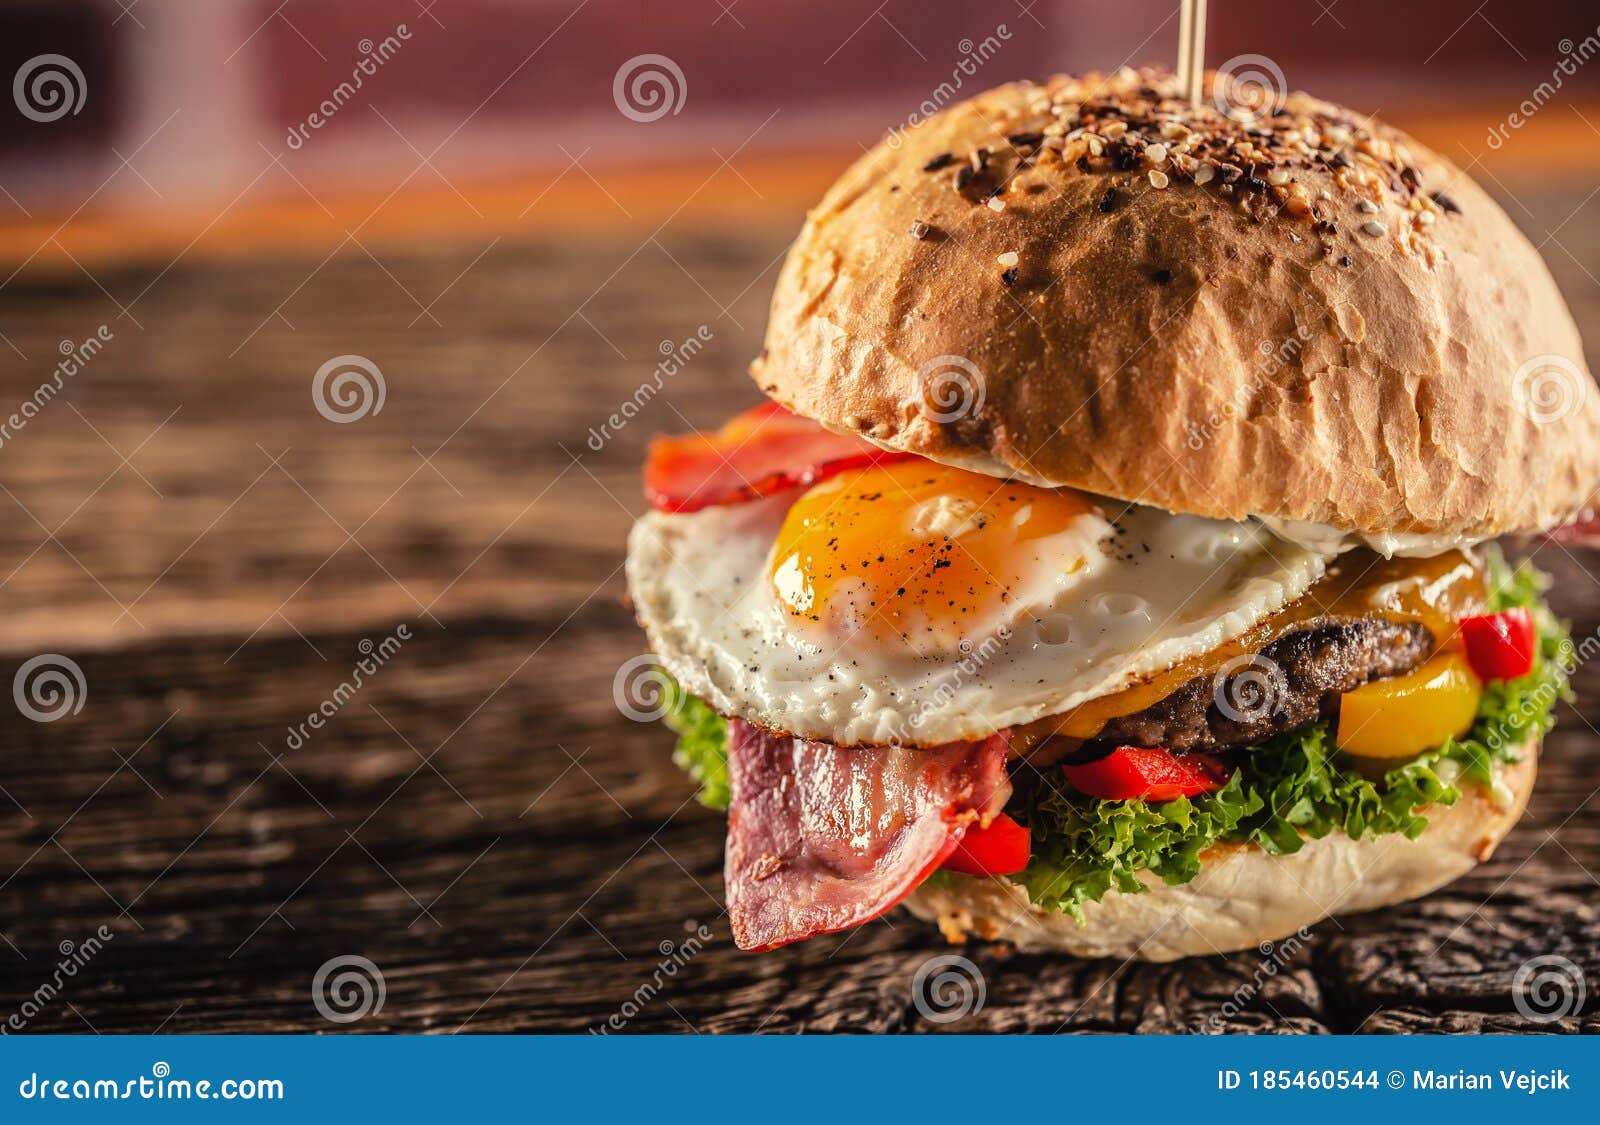 Detail of a Burger with Beef, Cheese, Egg, Bacon, Salad, Peppers in a ...